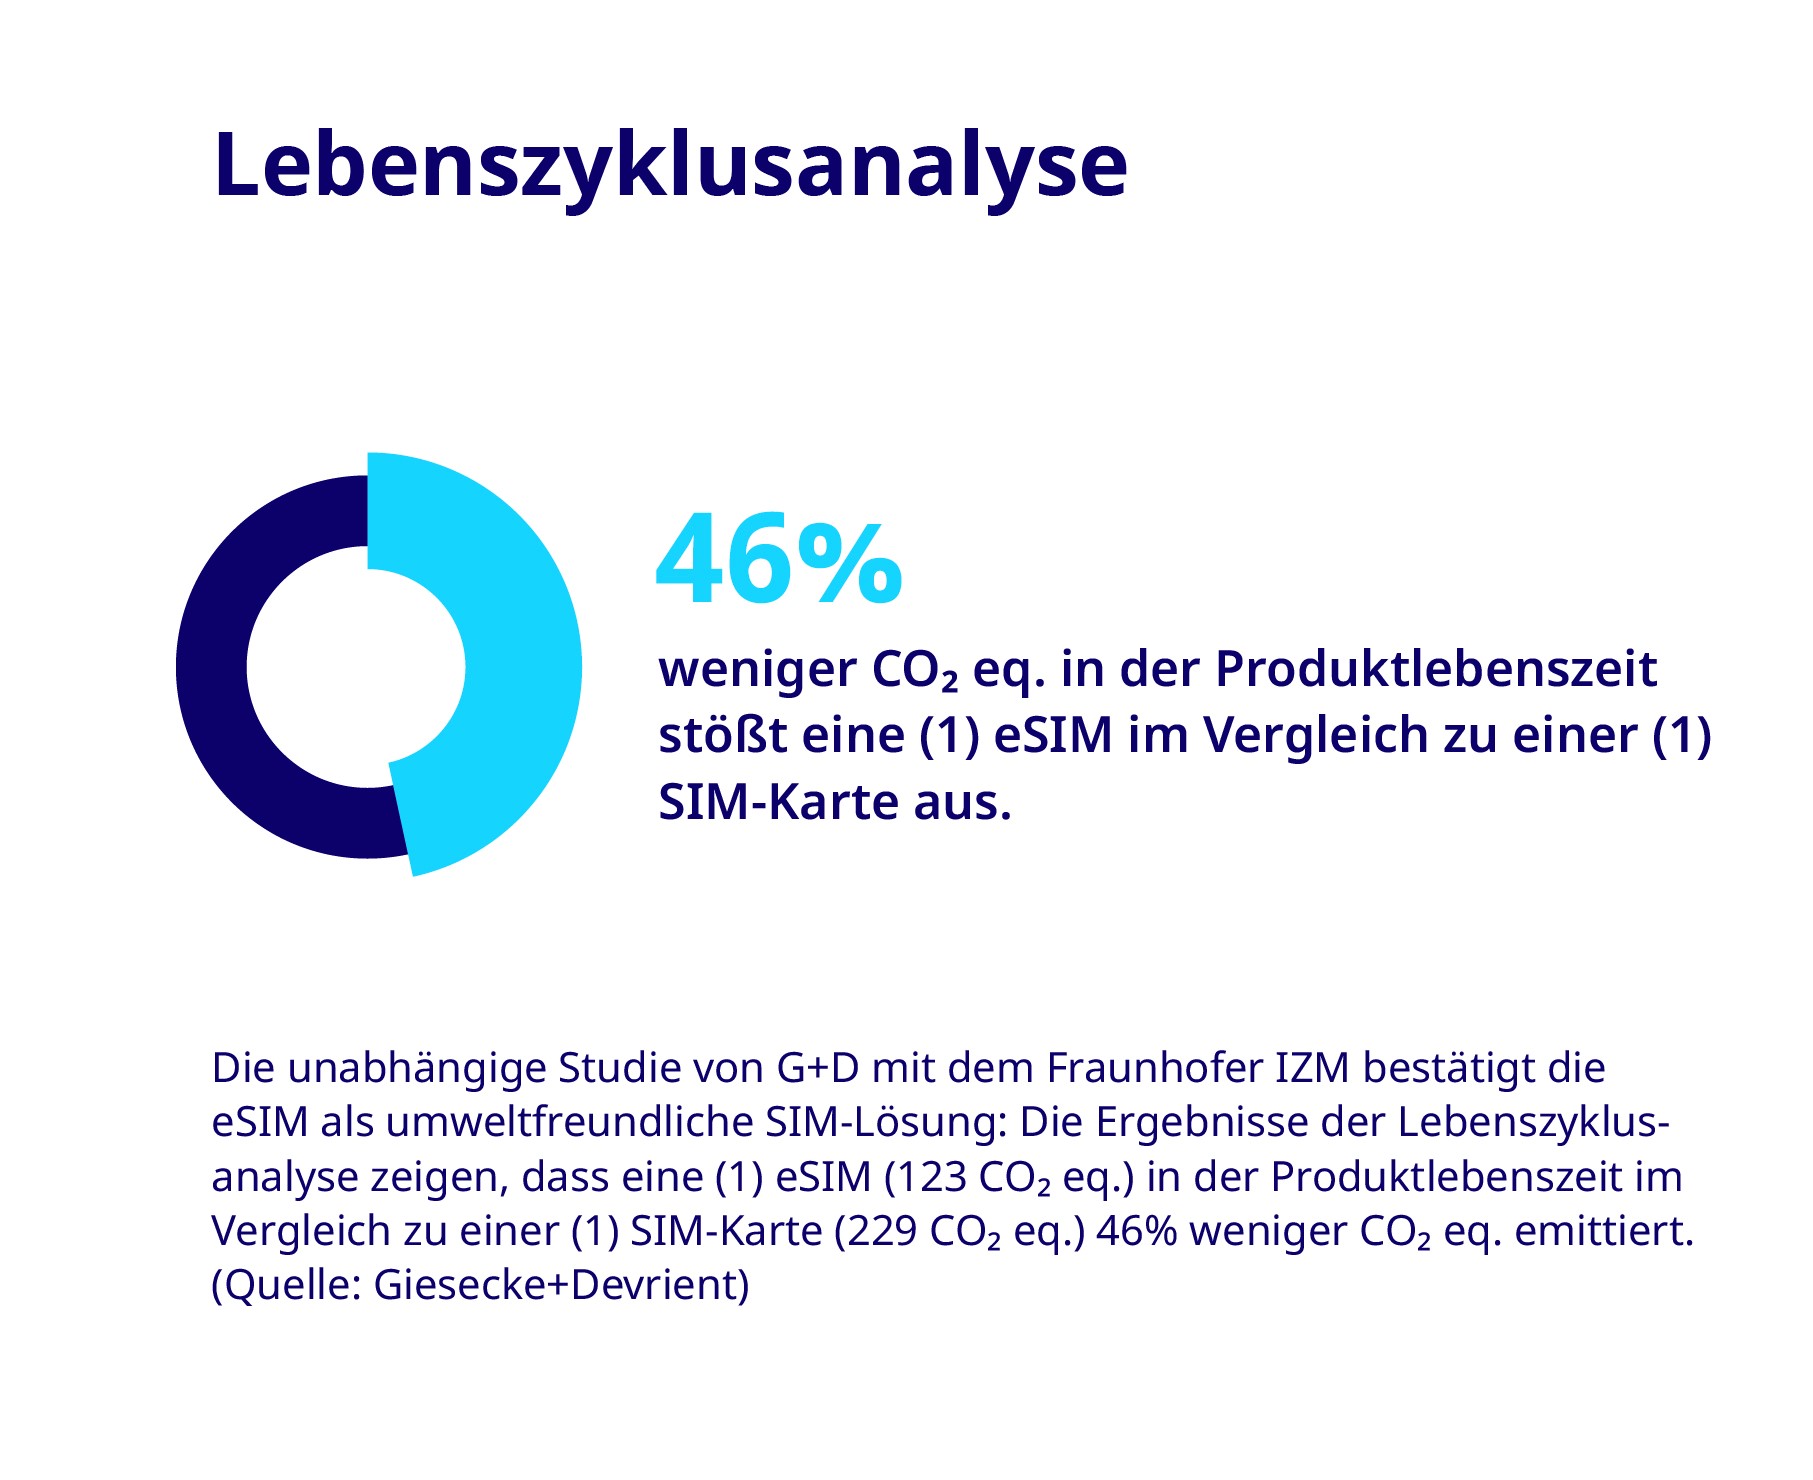 image - Independent study by Fraunhofer IZM for G+D confirms eSIM as an environmentally friendly SIM solution